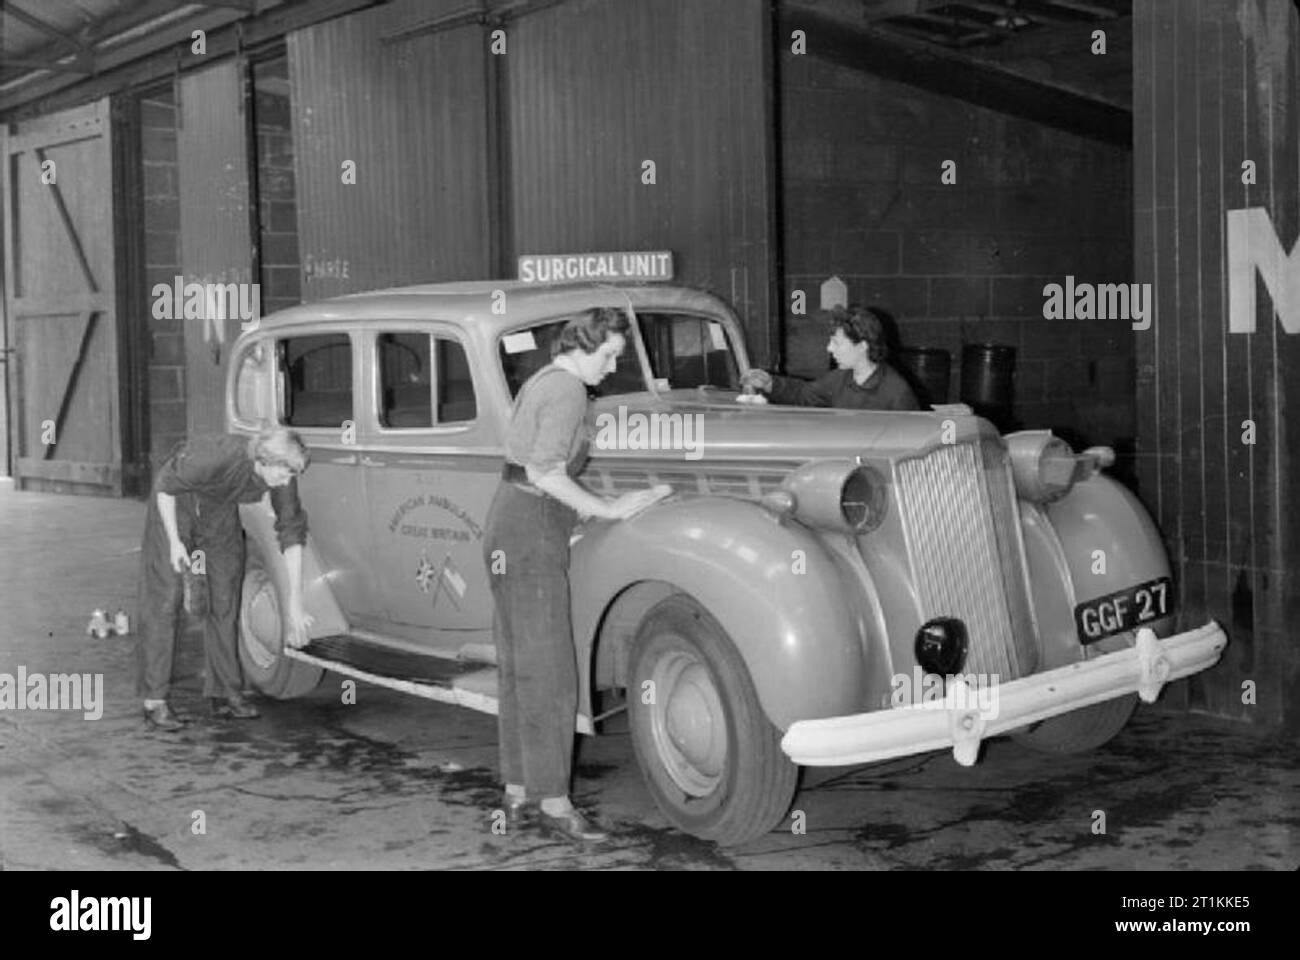 Flying Bomb- V1 Bomb Damage in London, England, UK, 1944 Women of the American Ambulance Great Britain wash an ambulance car of the surgical unit to pass the time between call-outs at their depot, somewhere in London. Stock Photo